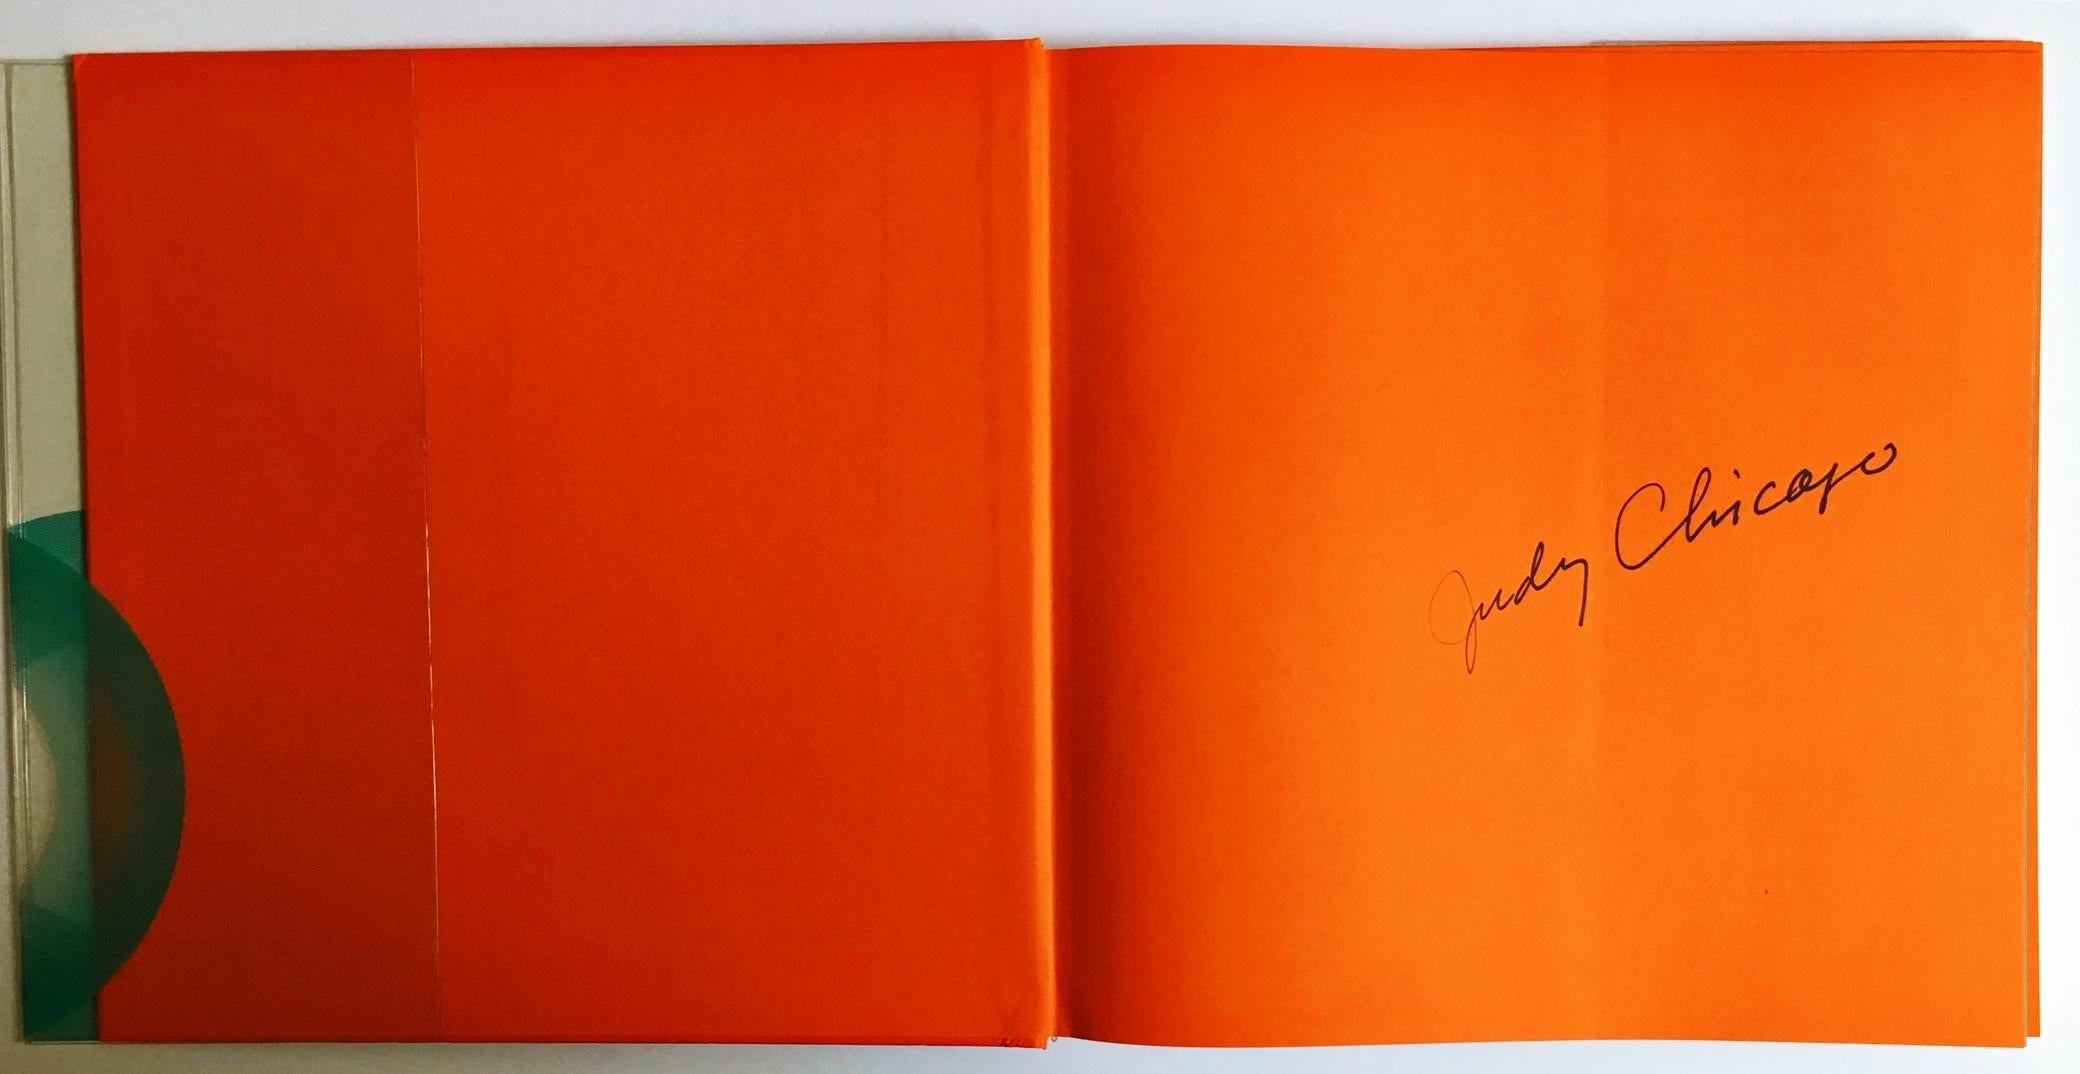 Judy Chicago
Deflowered (Hand Signed Book), 2013
Hardback Monograph and DVD with Dust Jacket. (Mixed media book set)
Boldly signed by the artist in black marker on the first front end page.
12 1/4 × 12 1/4 x 2 1/2 inches
Unframed
This hand signed